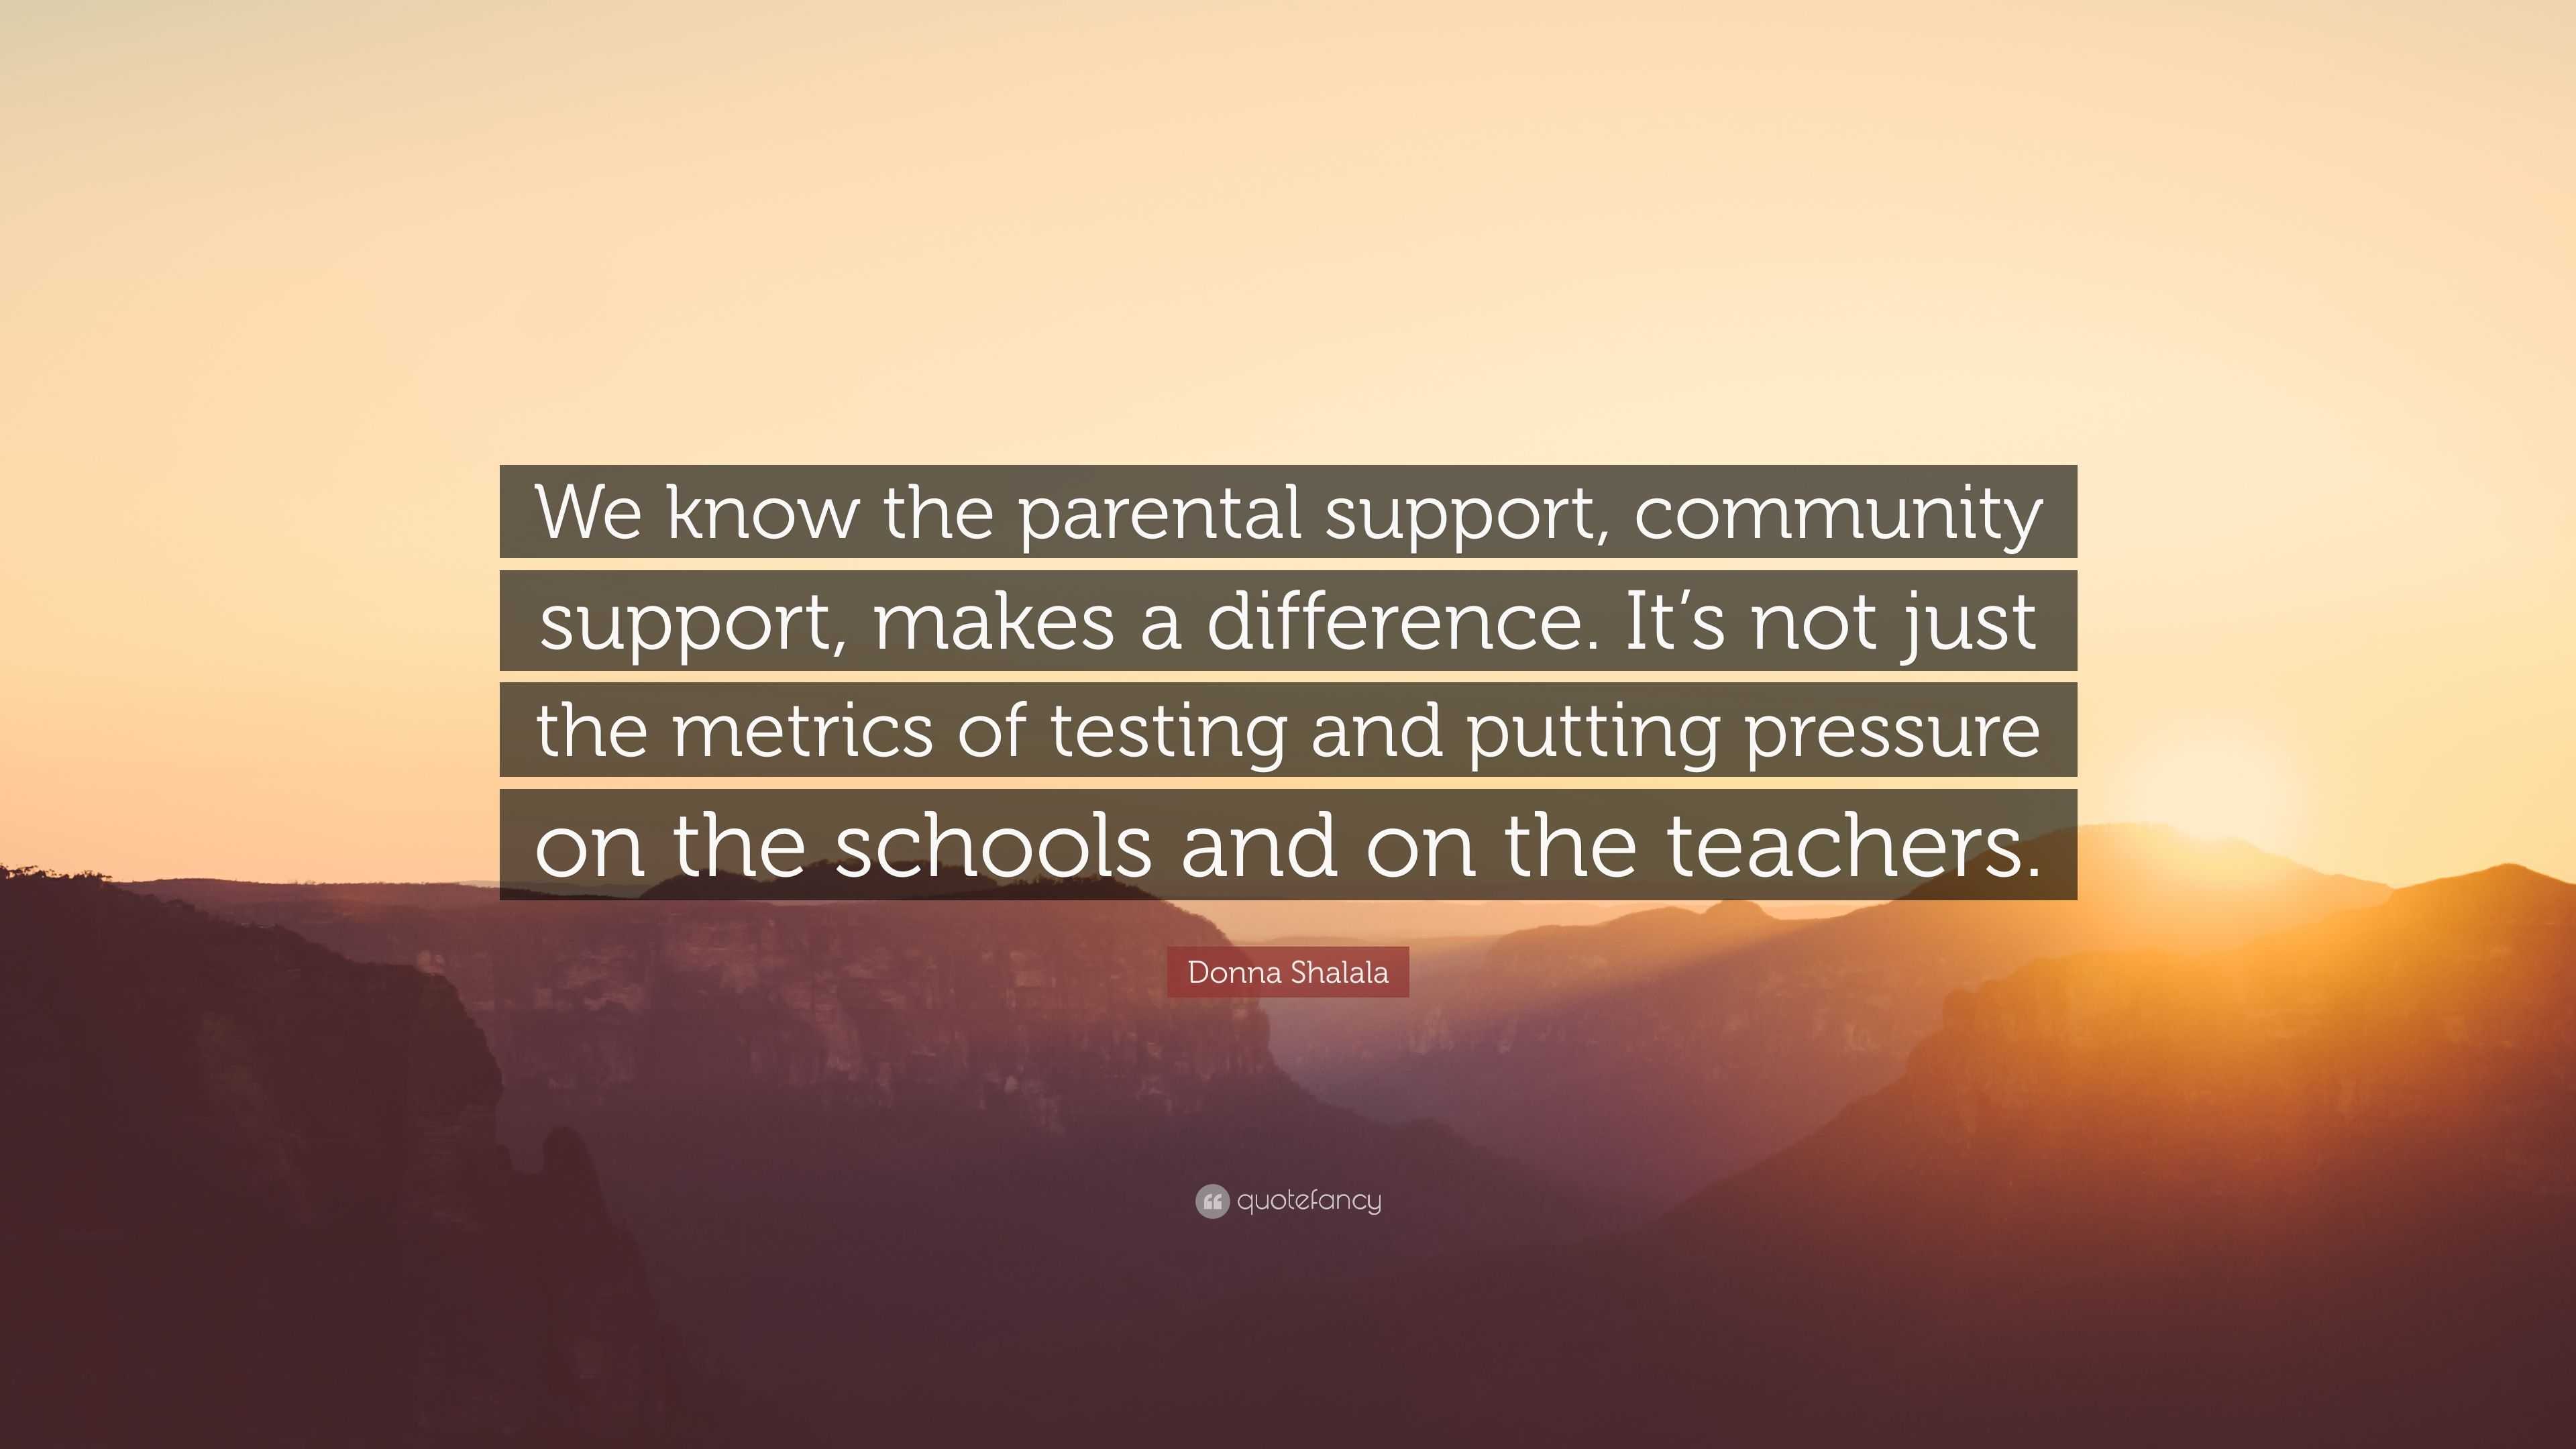 Donna Shalala Quote “We know the parental support